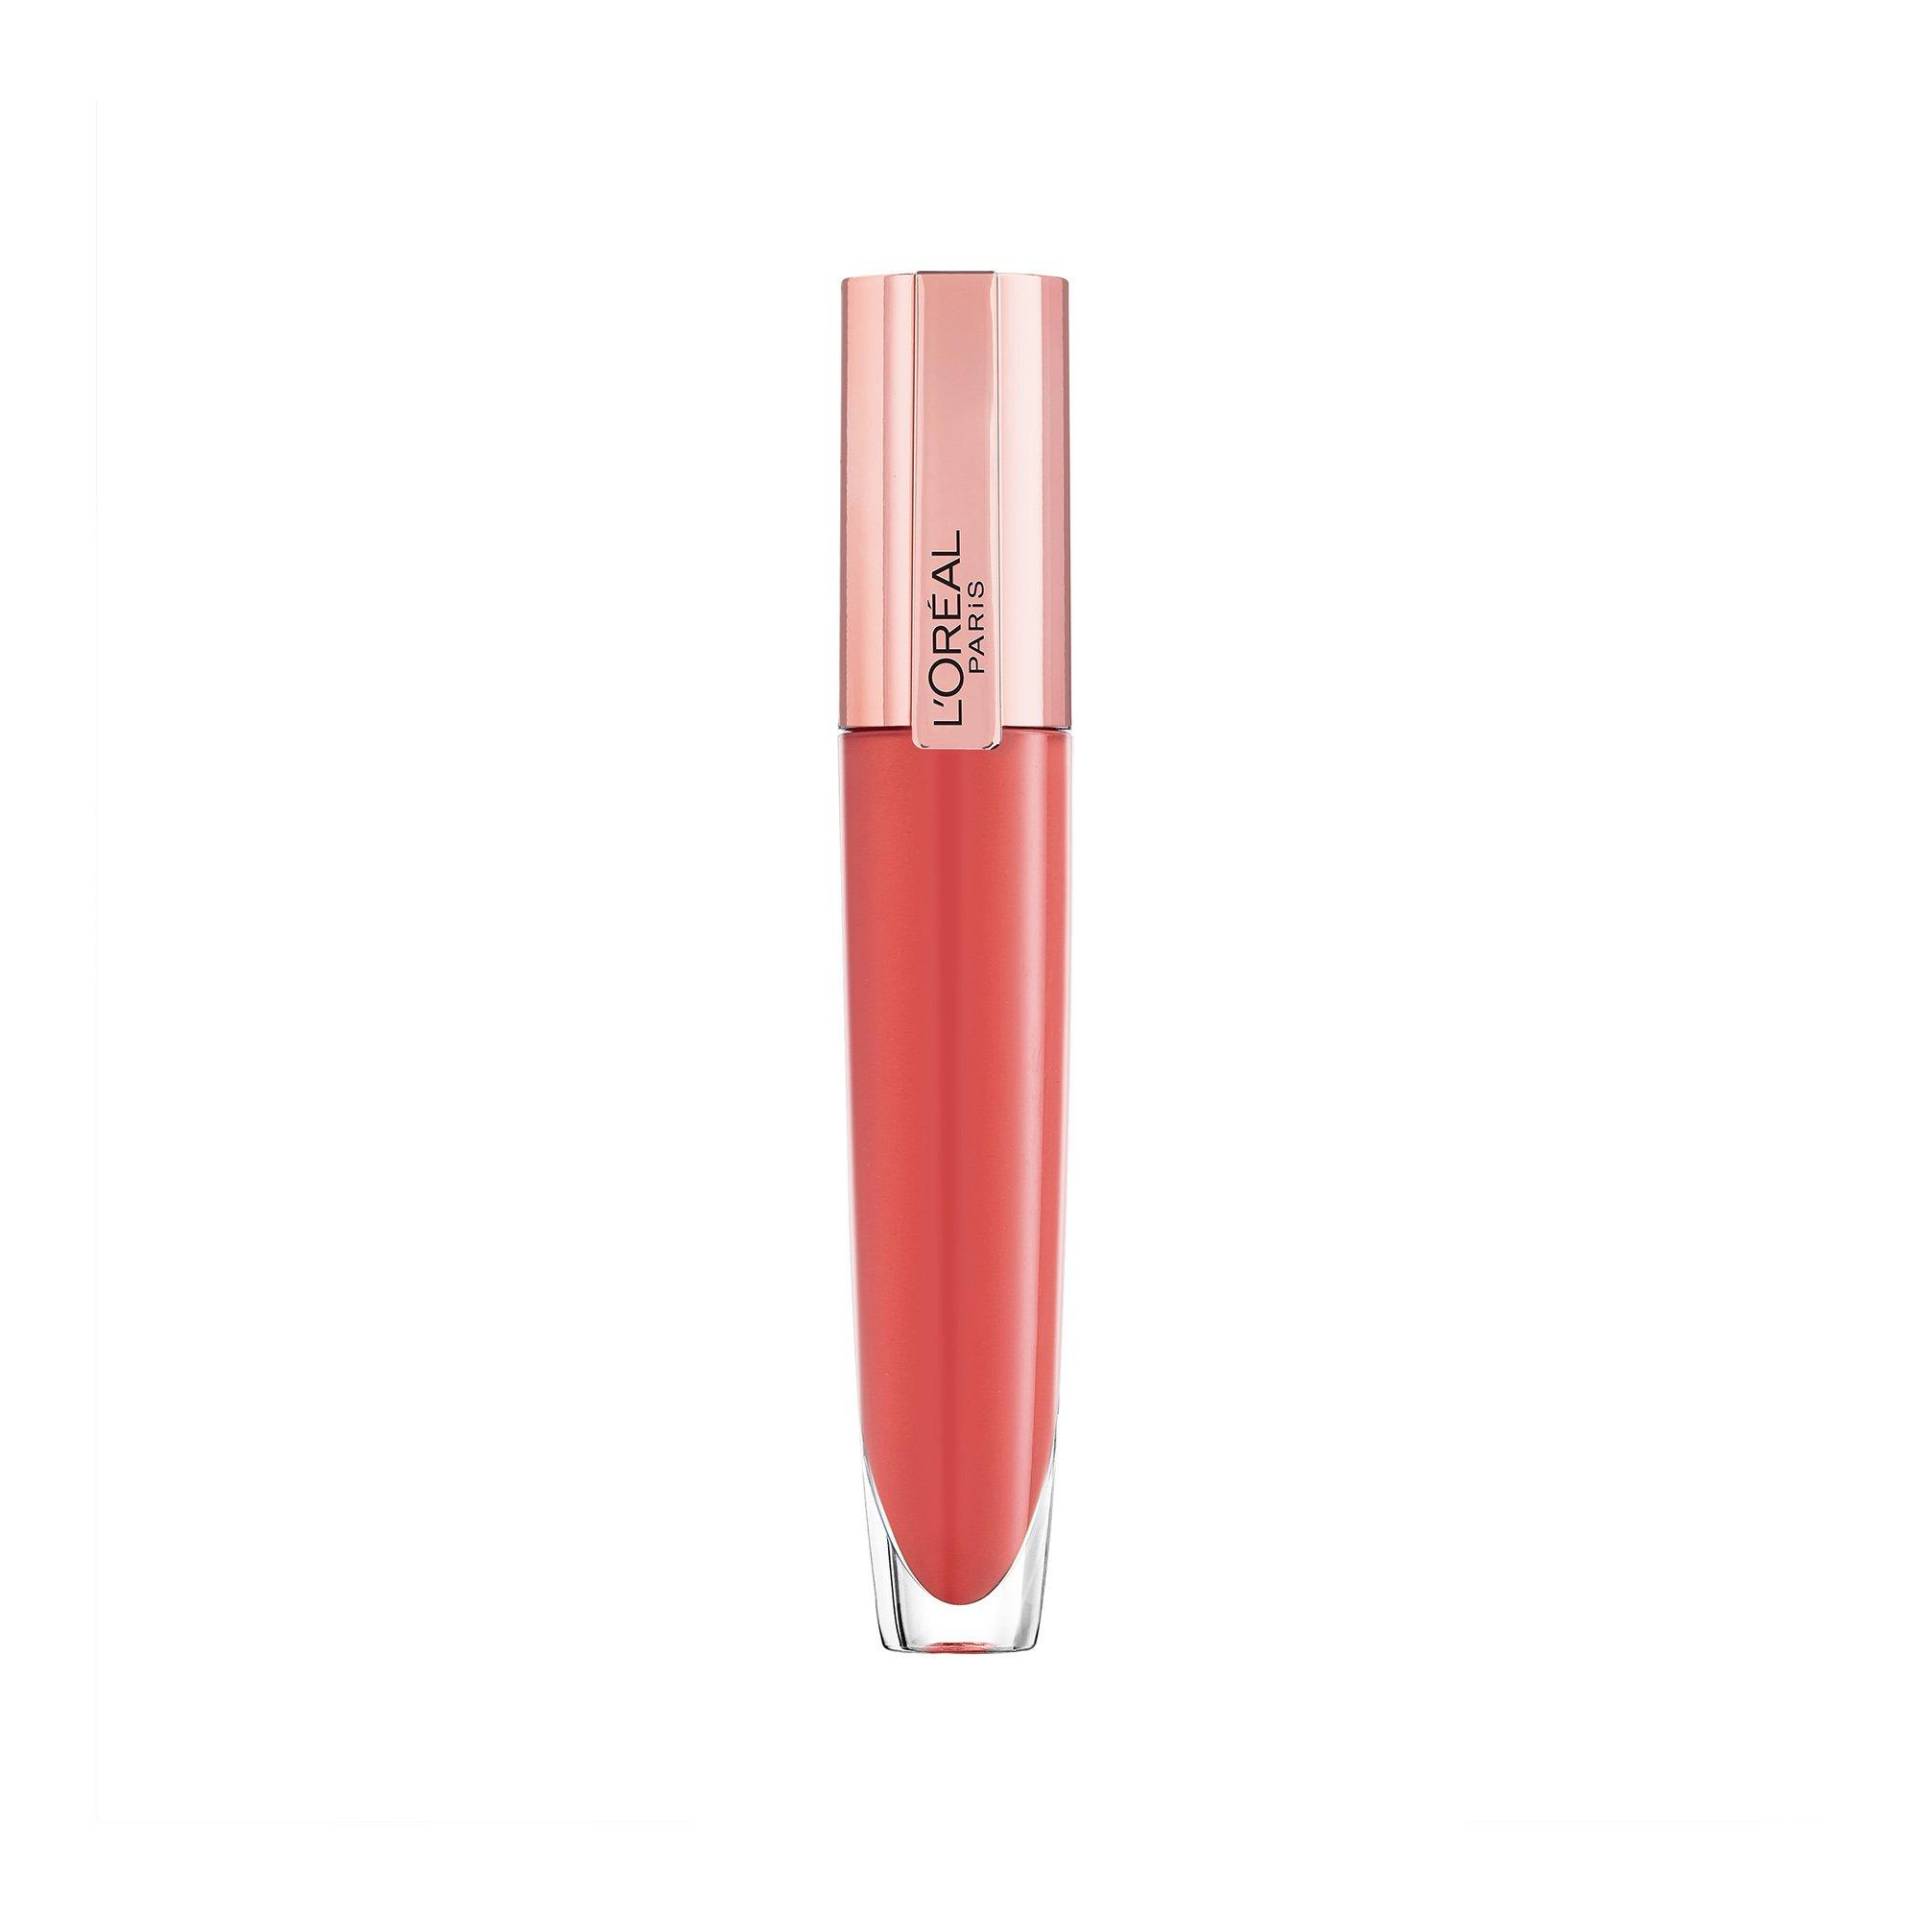 Glow Paradise Balm-in-gloss Damen  I Inflate von L'OREAL